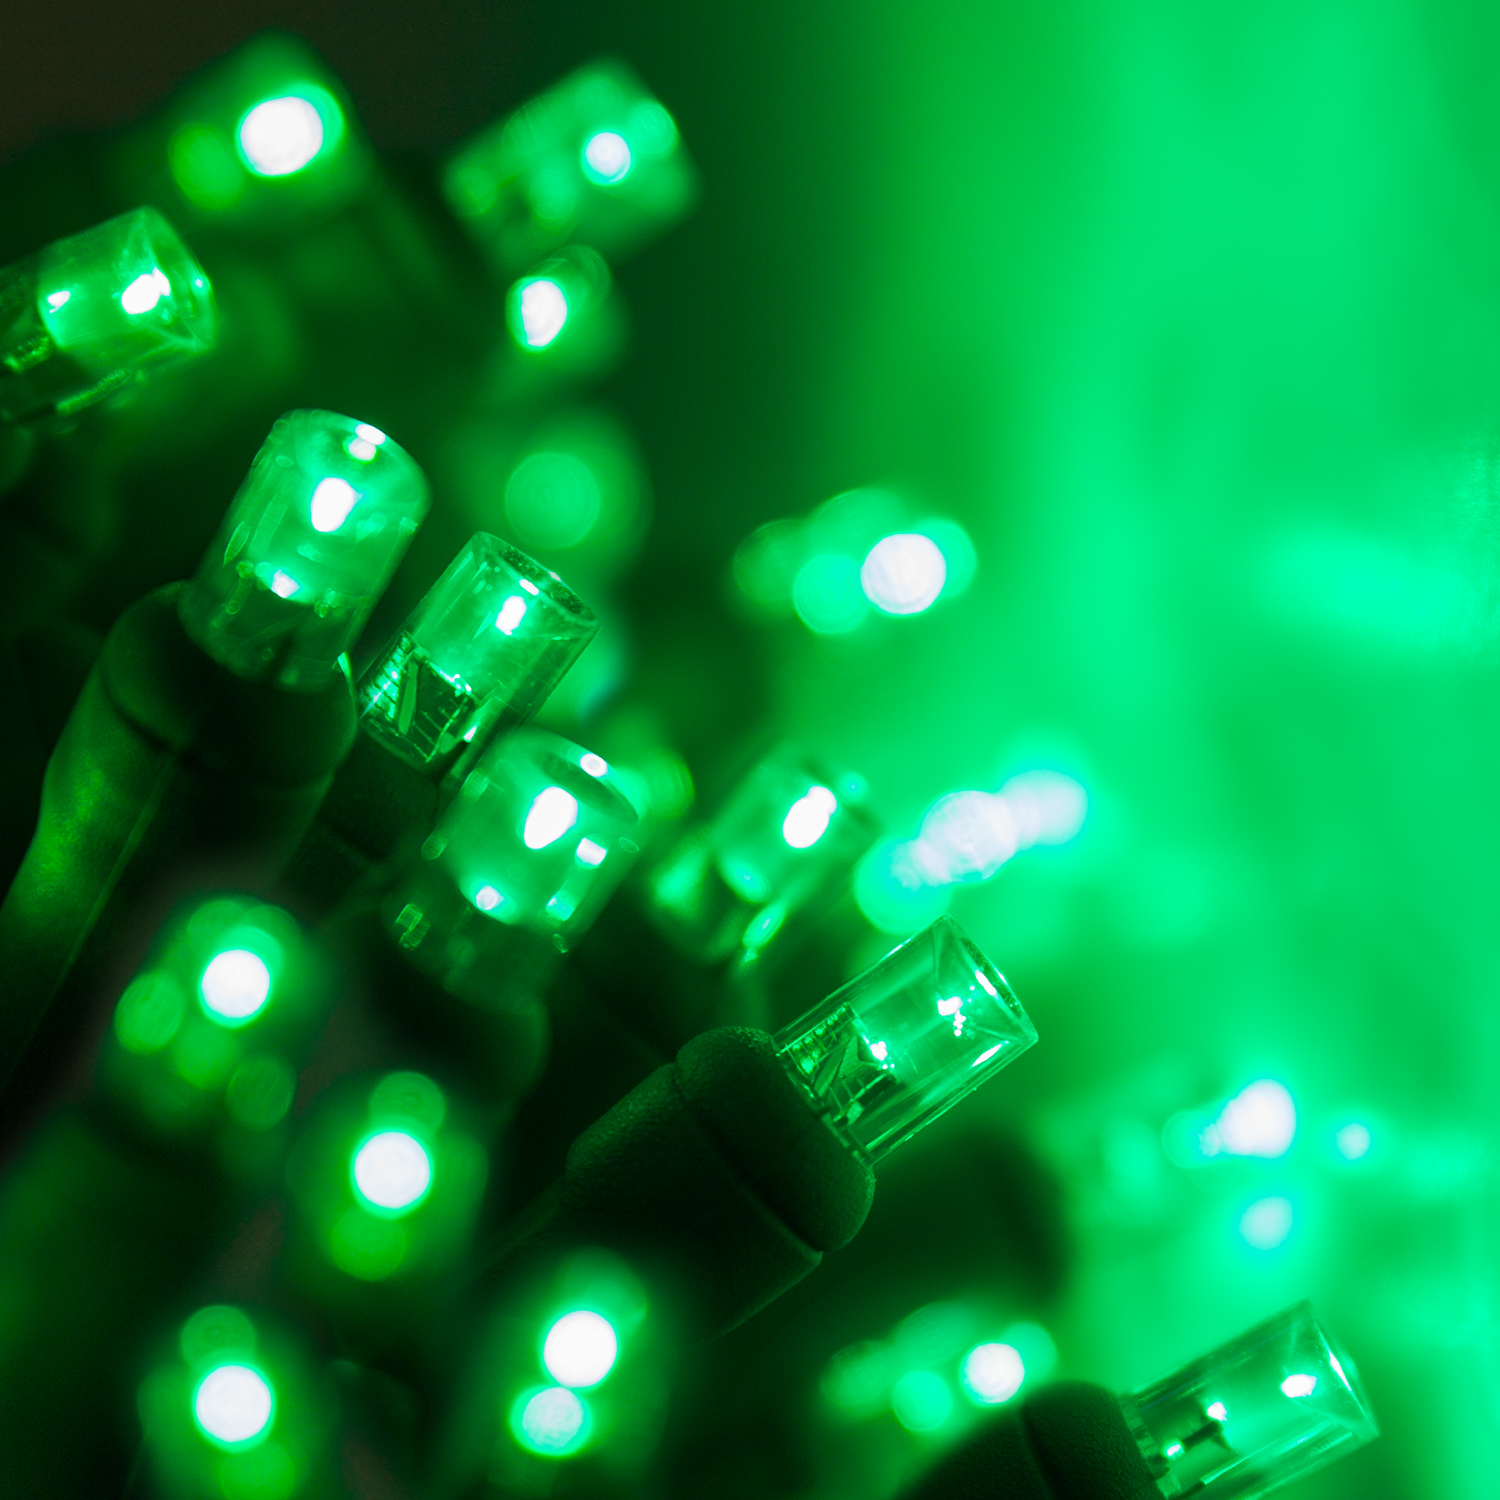 70 Green LED Christmas Lights, Long Life, Outdoor String Lights, Connectable, St. Patricks Day, Halloween, Christmas, Holidays, Party, Decoration, 24' Length, 4" Spacing - image 1 of 7